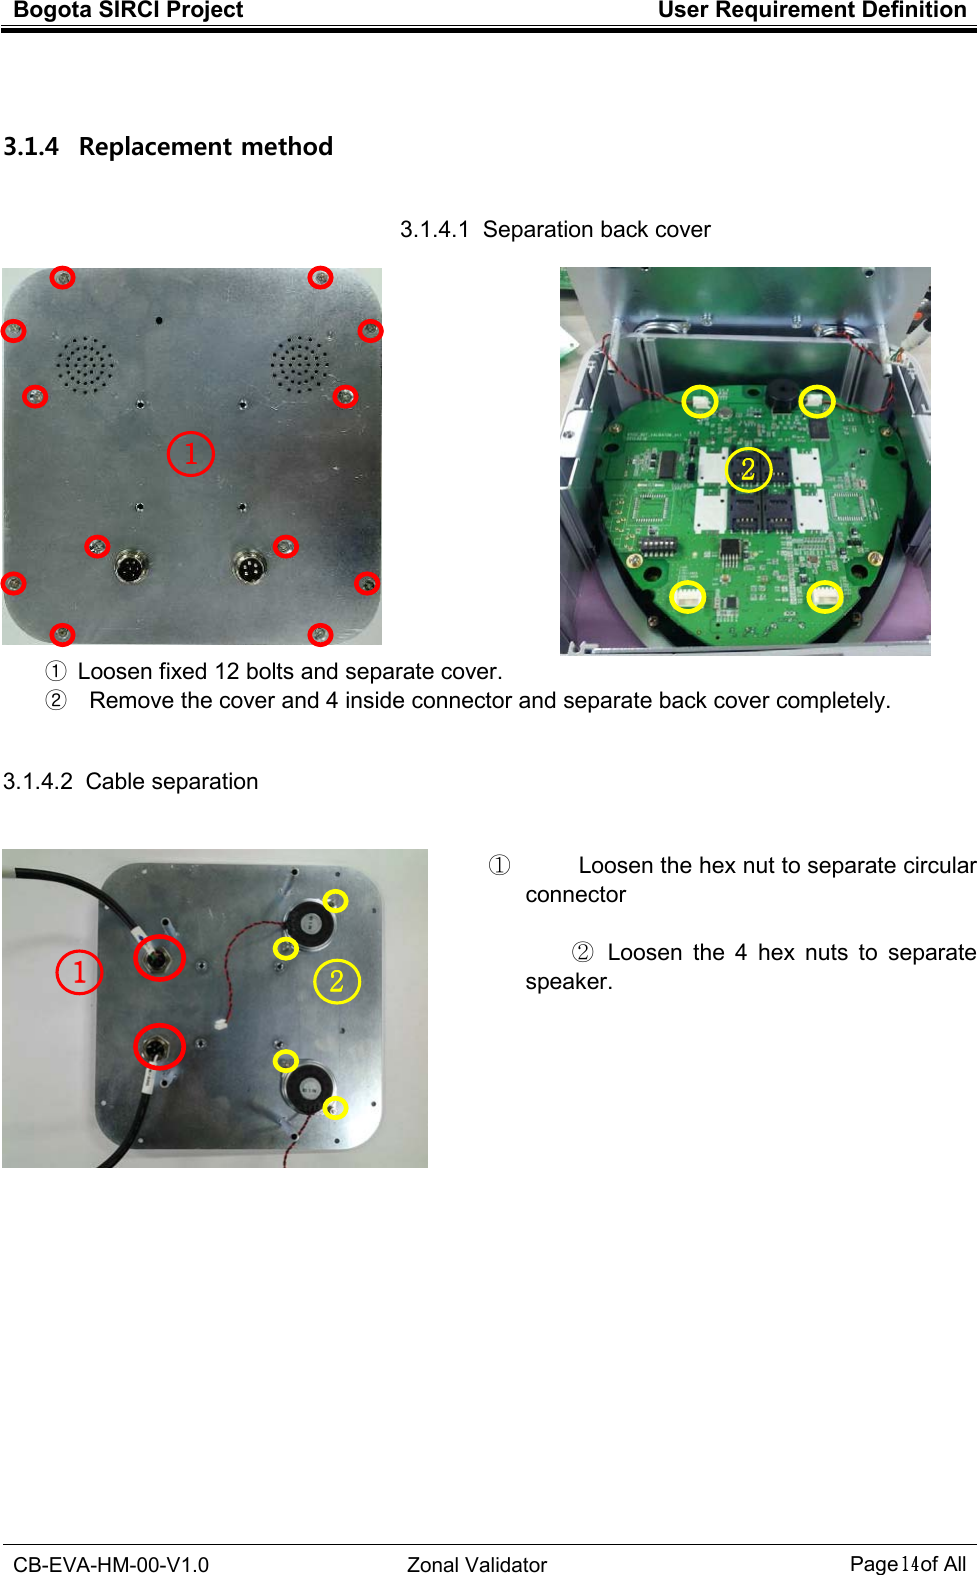 Bogota SIRCI Project  User Requirement Definition  CB-EVA-HM-00-V1.0  Zonal Validator Page１４１４１４１４ of All   3.1.4   Replacement method 3.1.4.1  Separation back cover  ①  Loosen fixed 12 bolts and separate cover. ②    Remove the cover and 4 inside connector and separate back cover completely.  3.1.4.2  Cable separation       ①            Loosen the hex nut to separate circular connector  ②   Loosen  the  4  hex  nuts  to  separate speaker.               1111    2222    1111    2222    